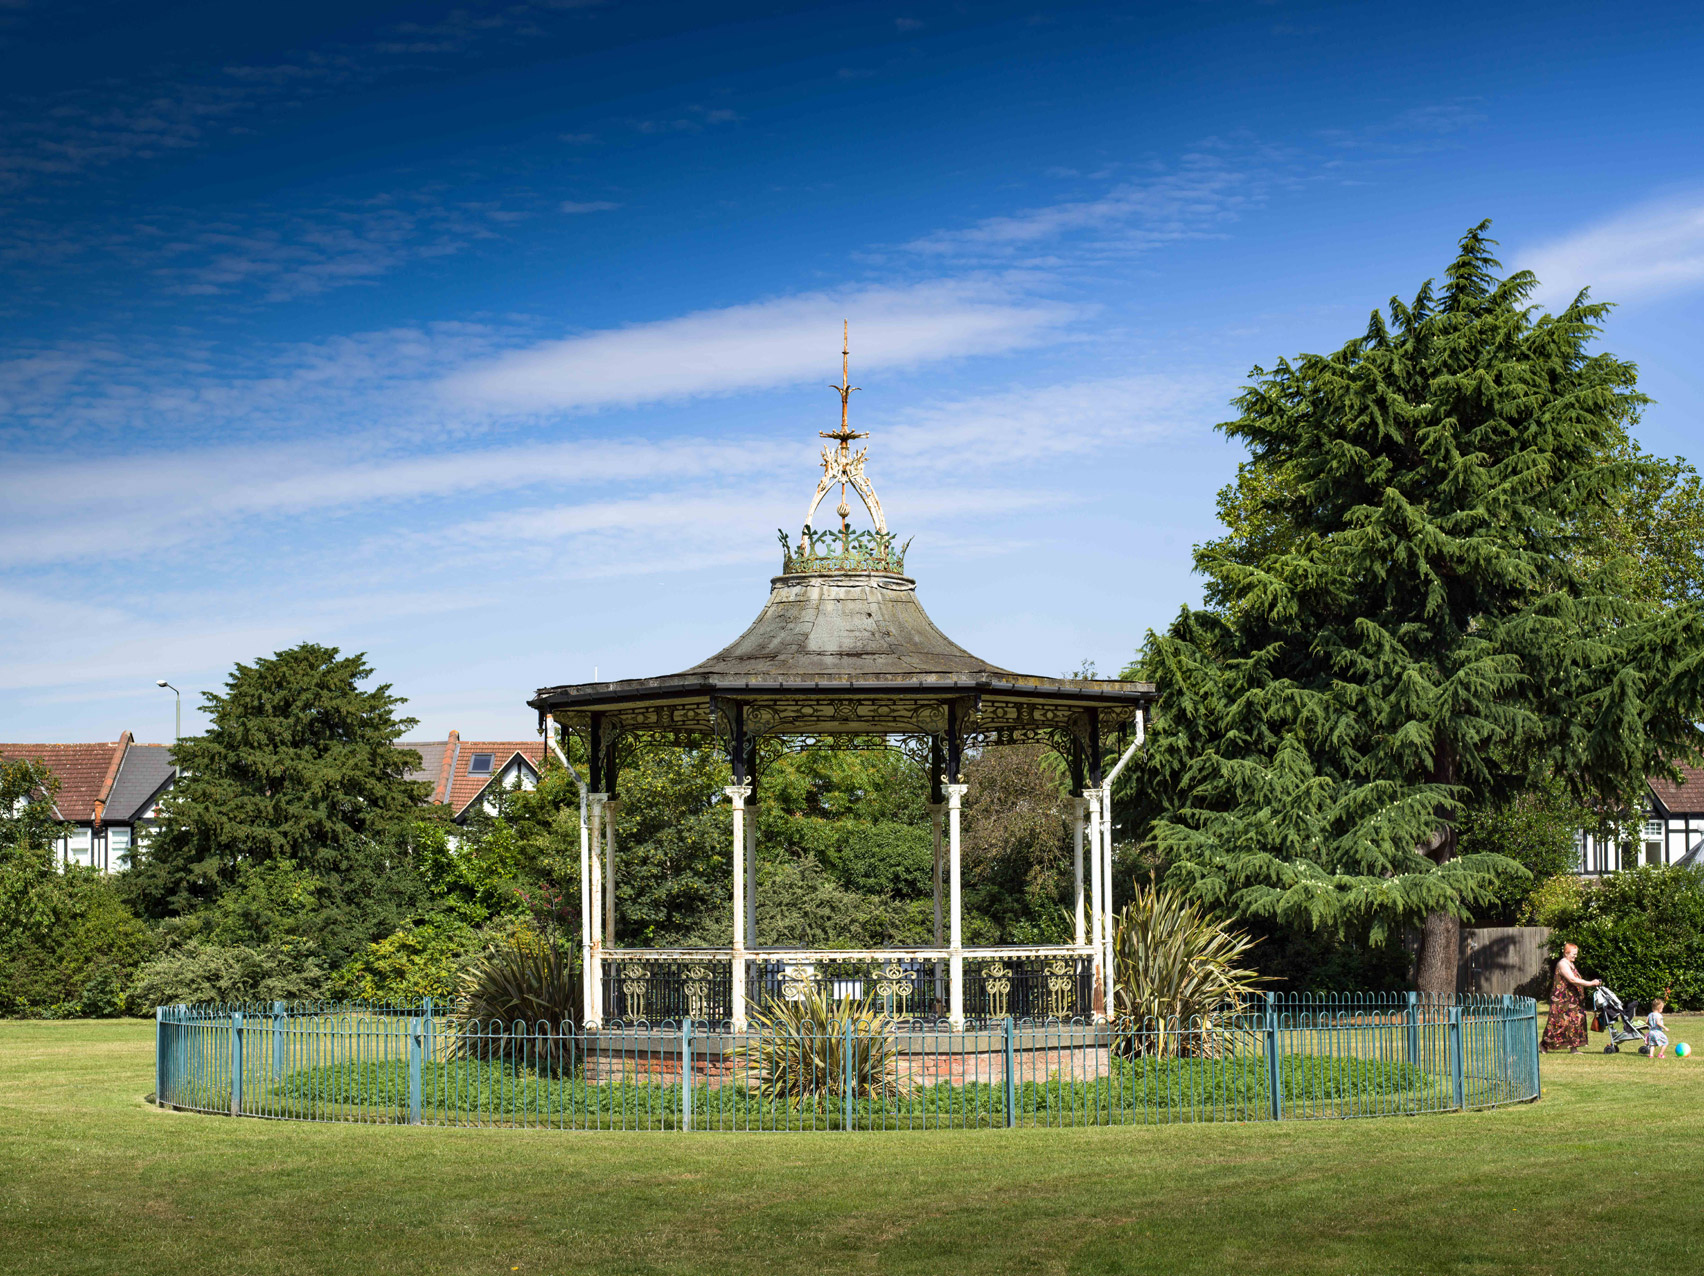 David Bowie's bandstand in Beckenham listed